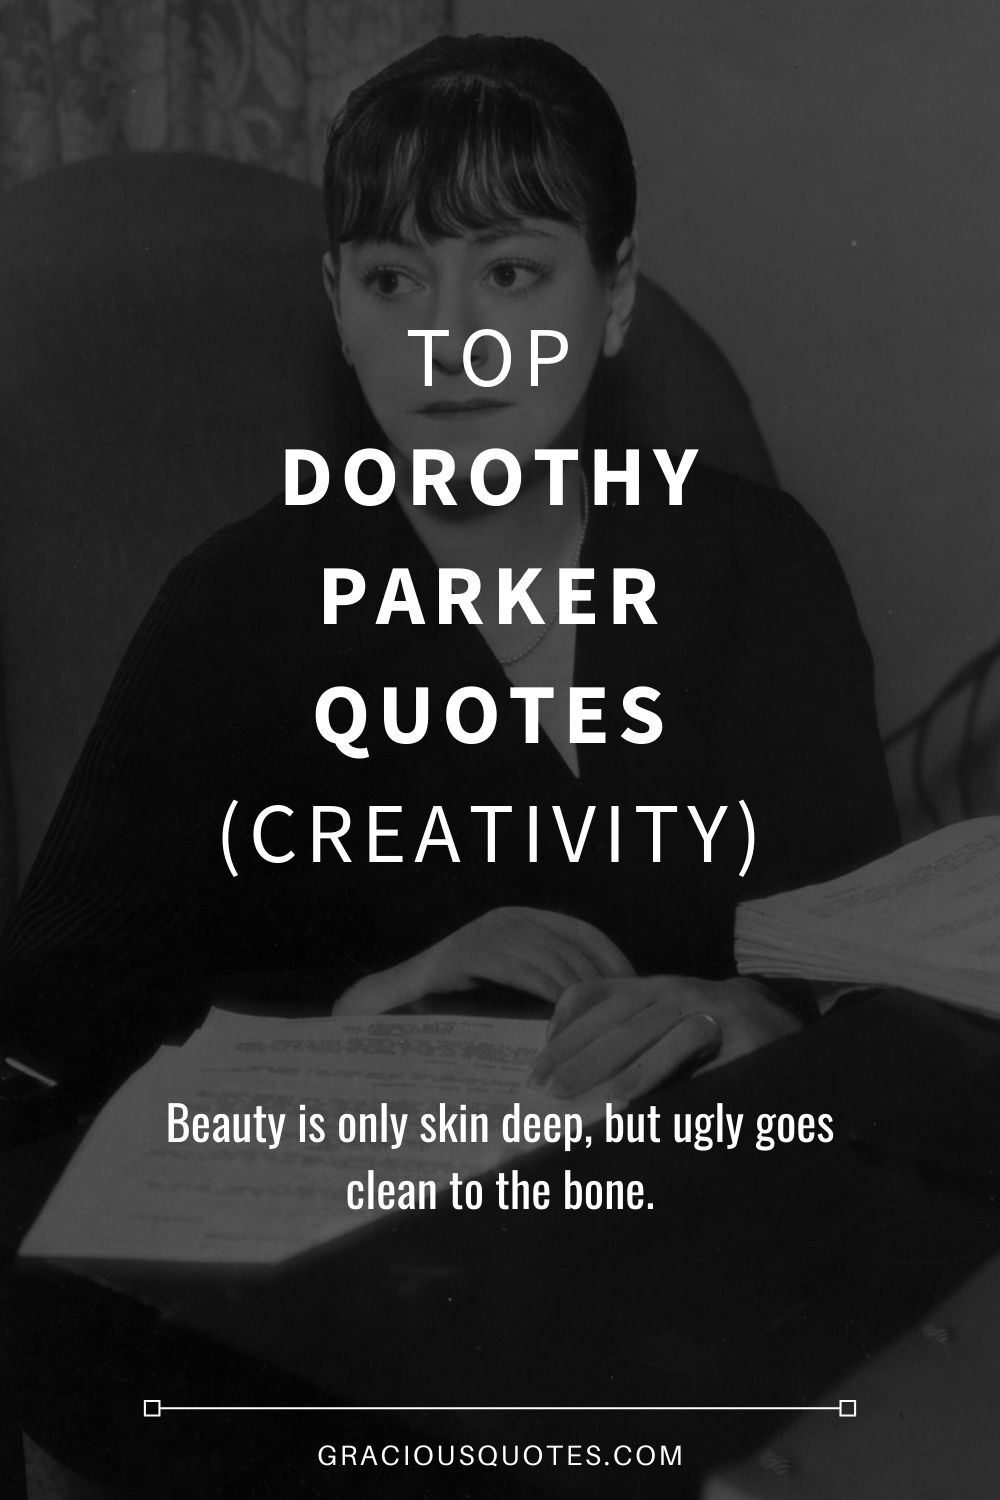 Top Dorothy Parker Quotes (CREATIVITY) - Gracious Quotes